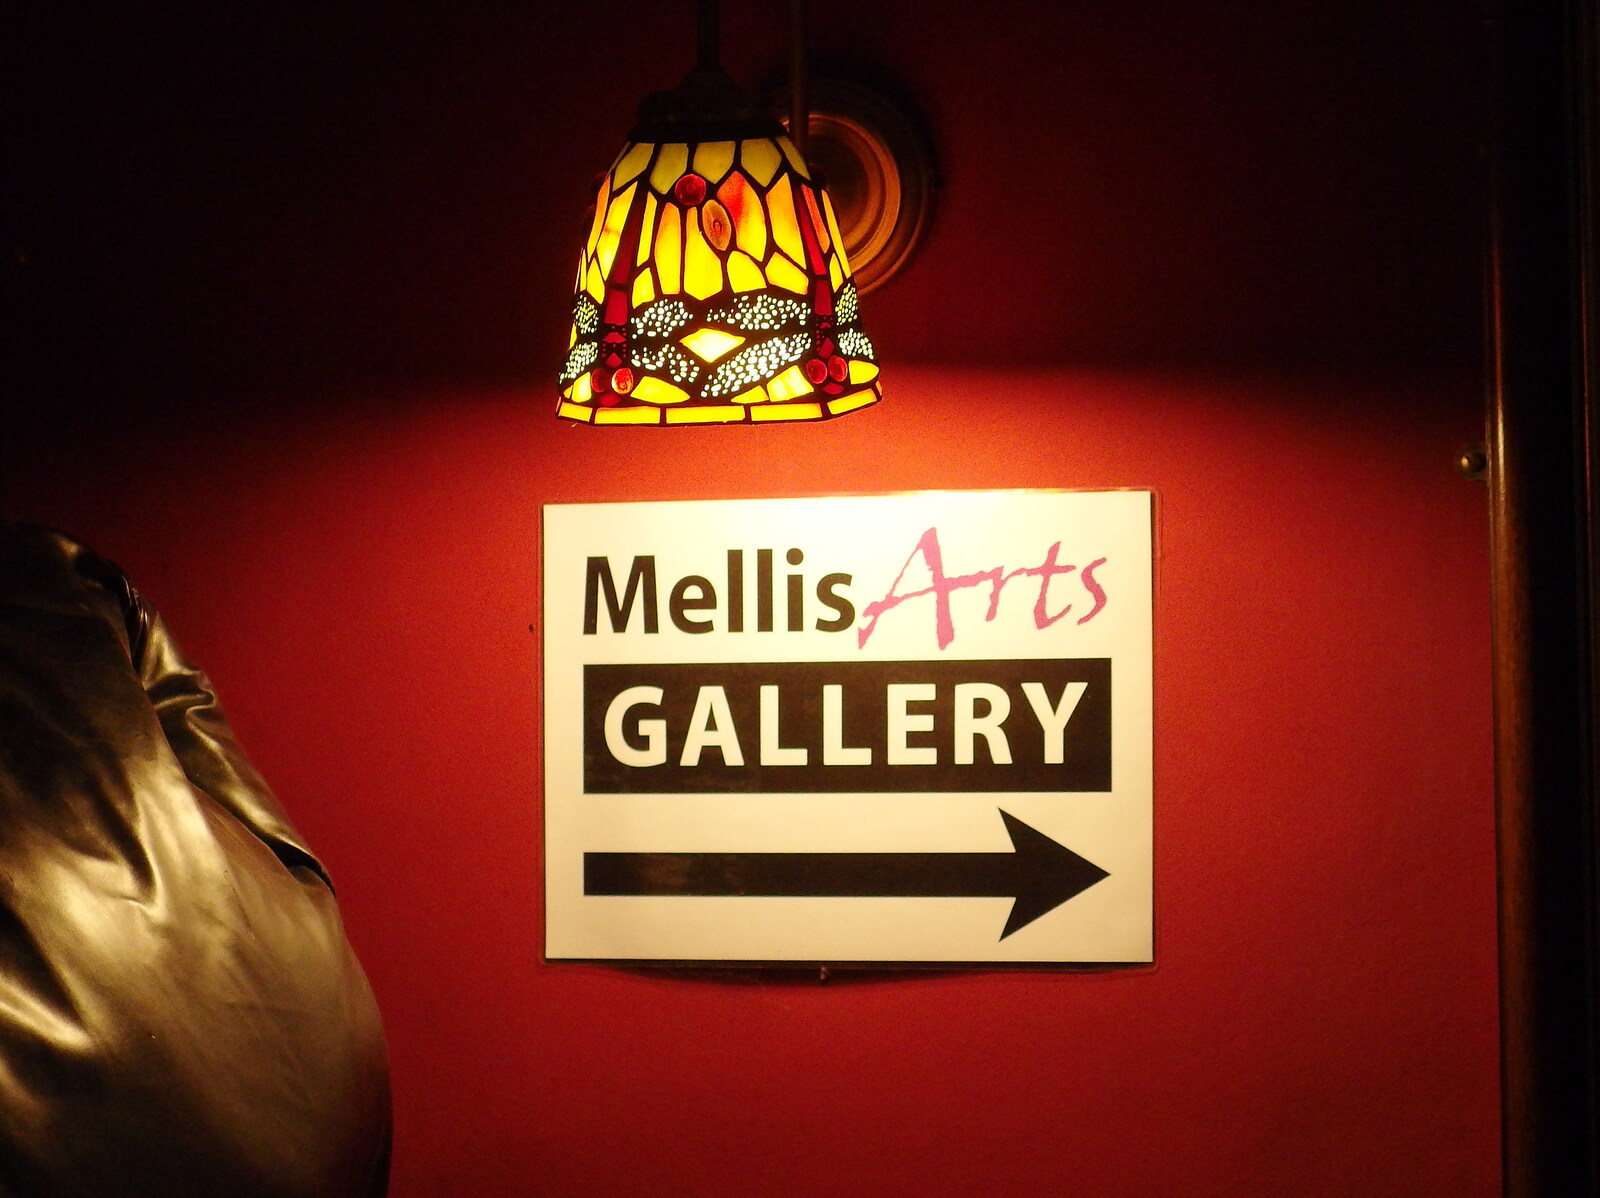 A sign for an art gallery from Pigeon-Eating Hawks and the Mellis Beer Festival, London and Suffolk - 31st August 2013